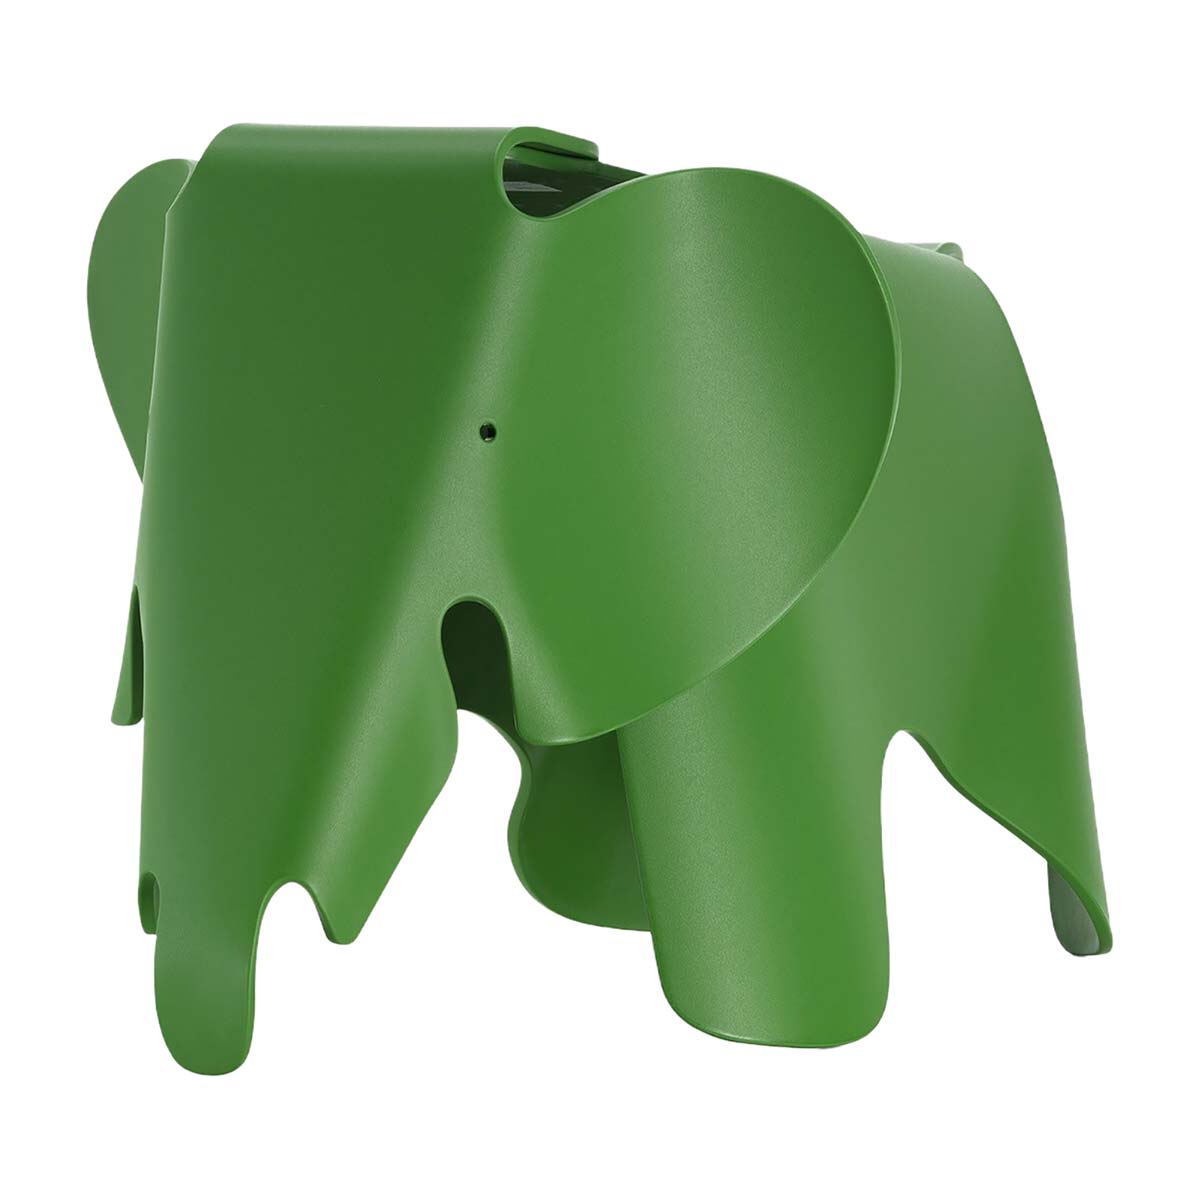 Eames Elephant by Vitra, design Charles & Ray Eames